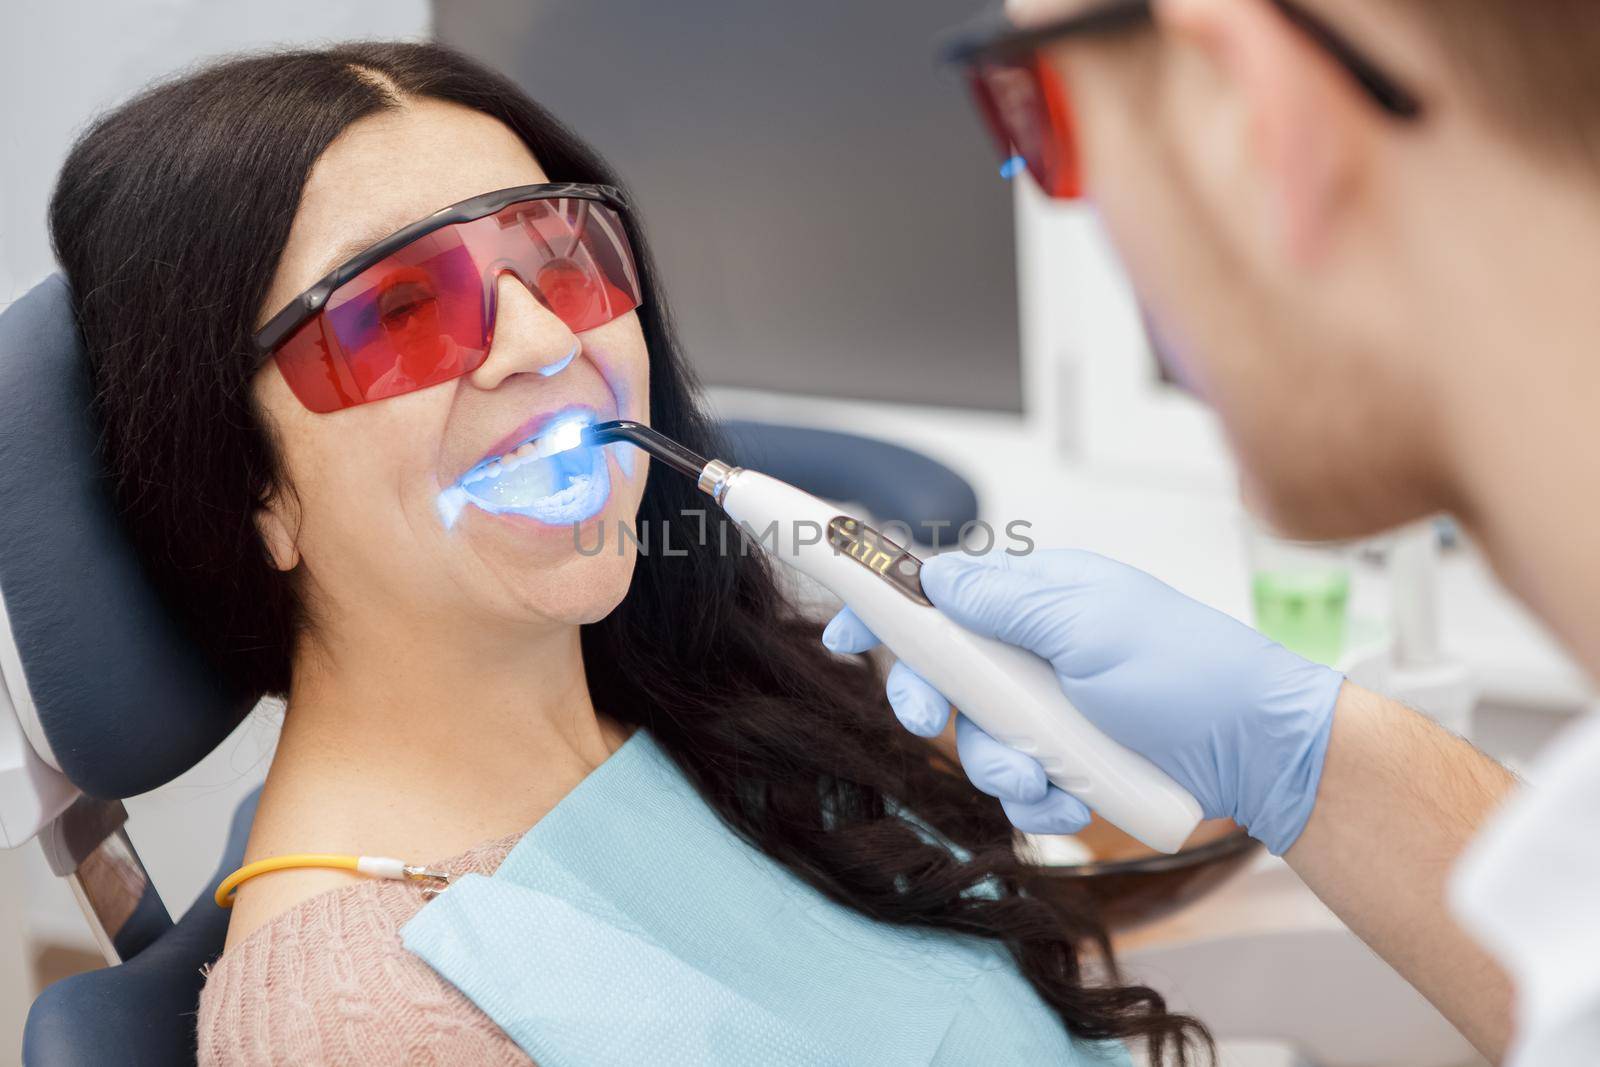 Dental fillings. Close up of a beautiful senior female patient getting dental fillings fixed with ultraviolet lamp professionalism technology modern equipment UV healthcare filling dentistry medical